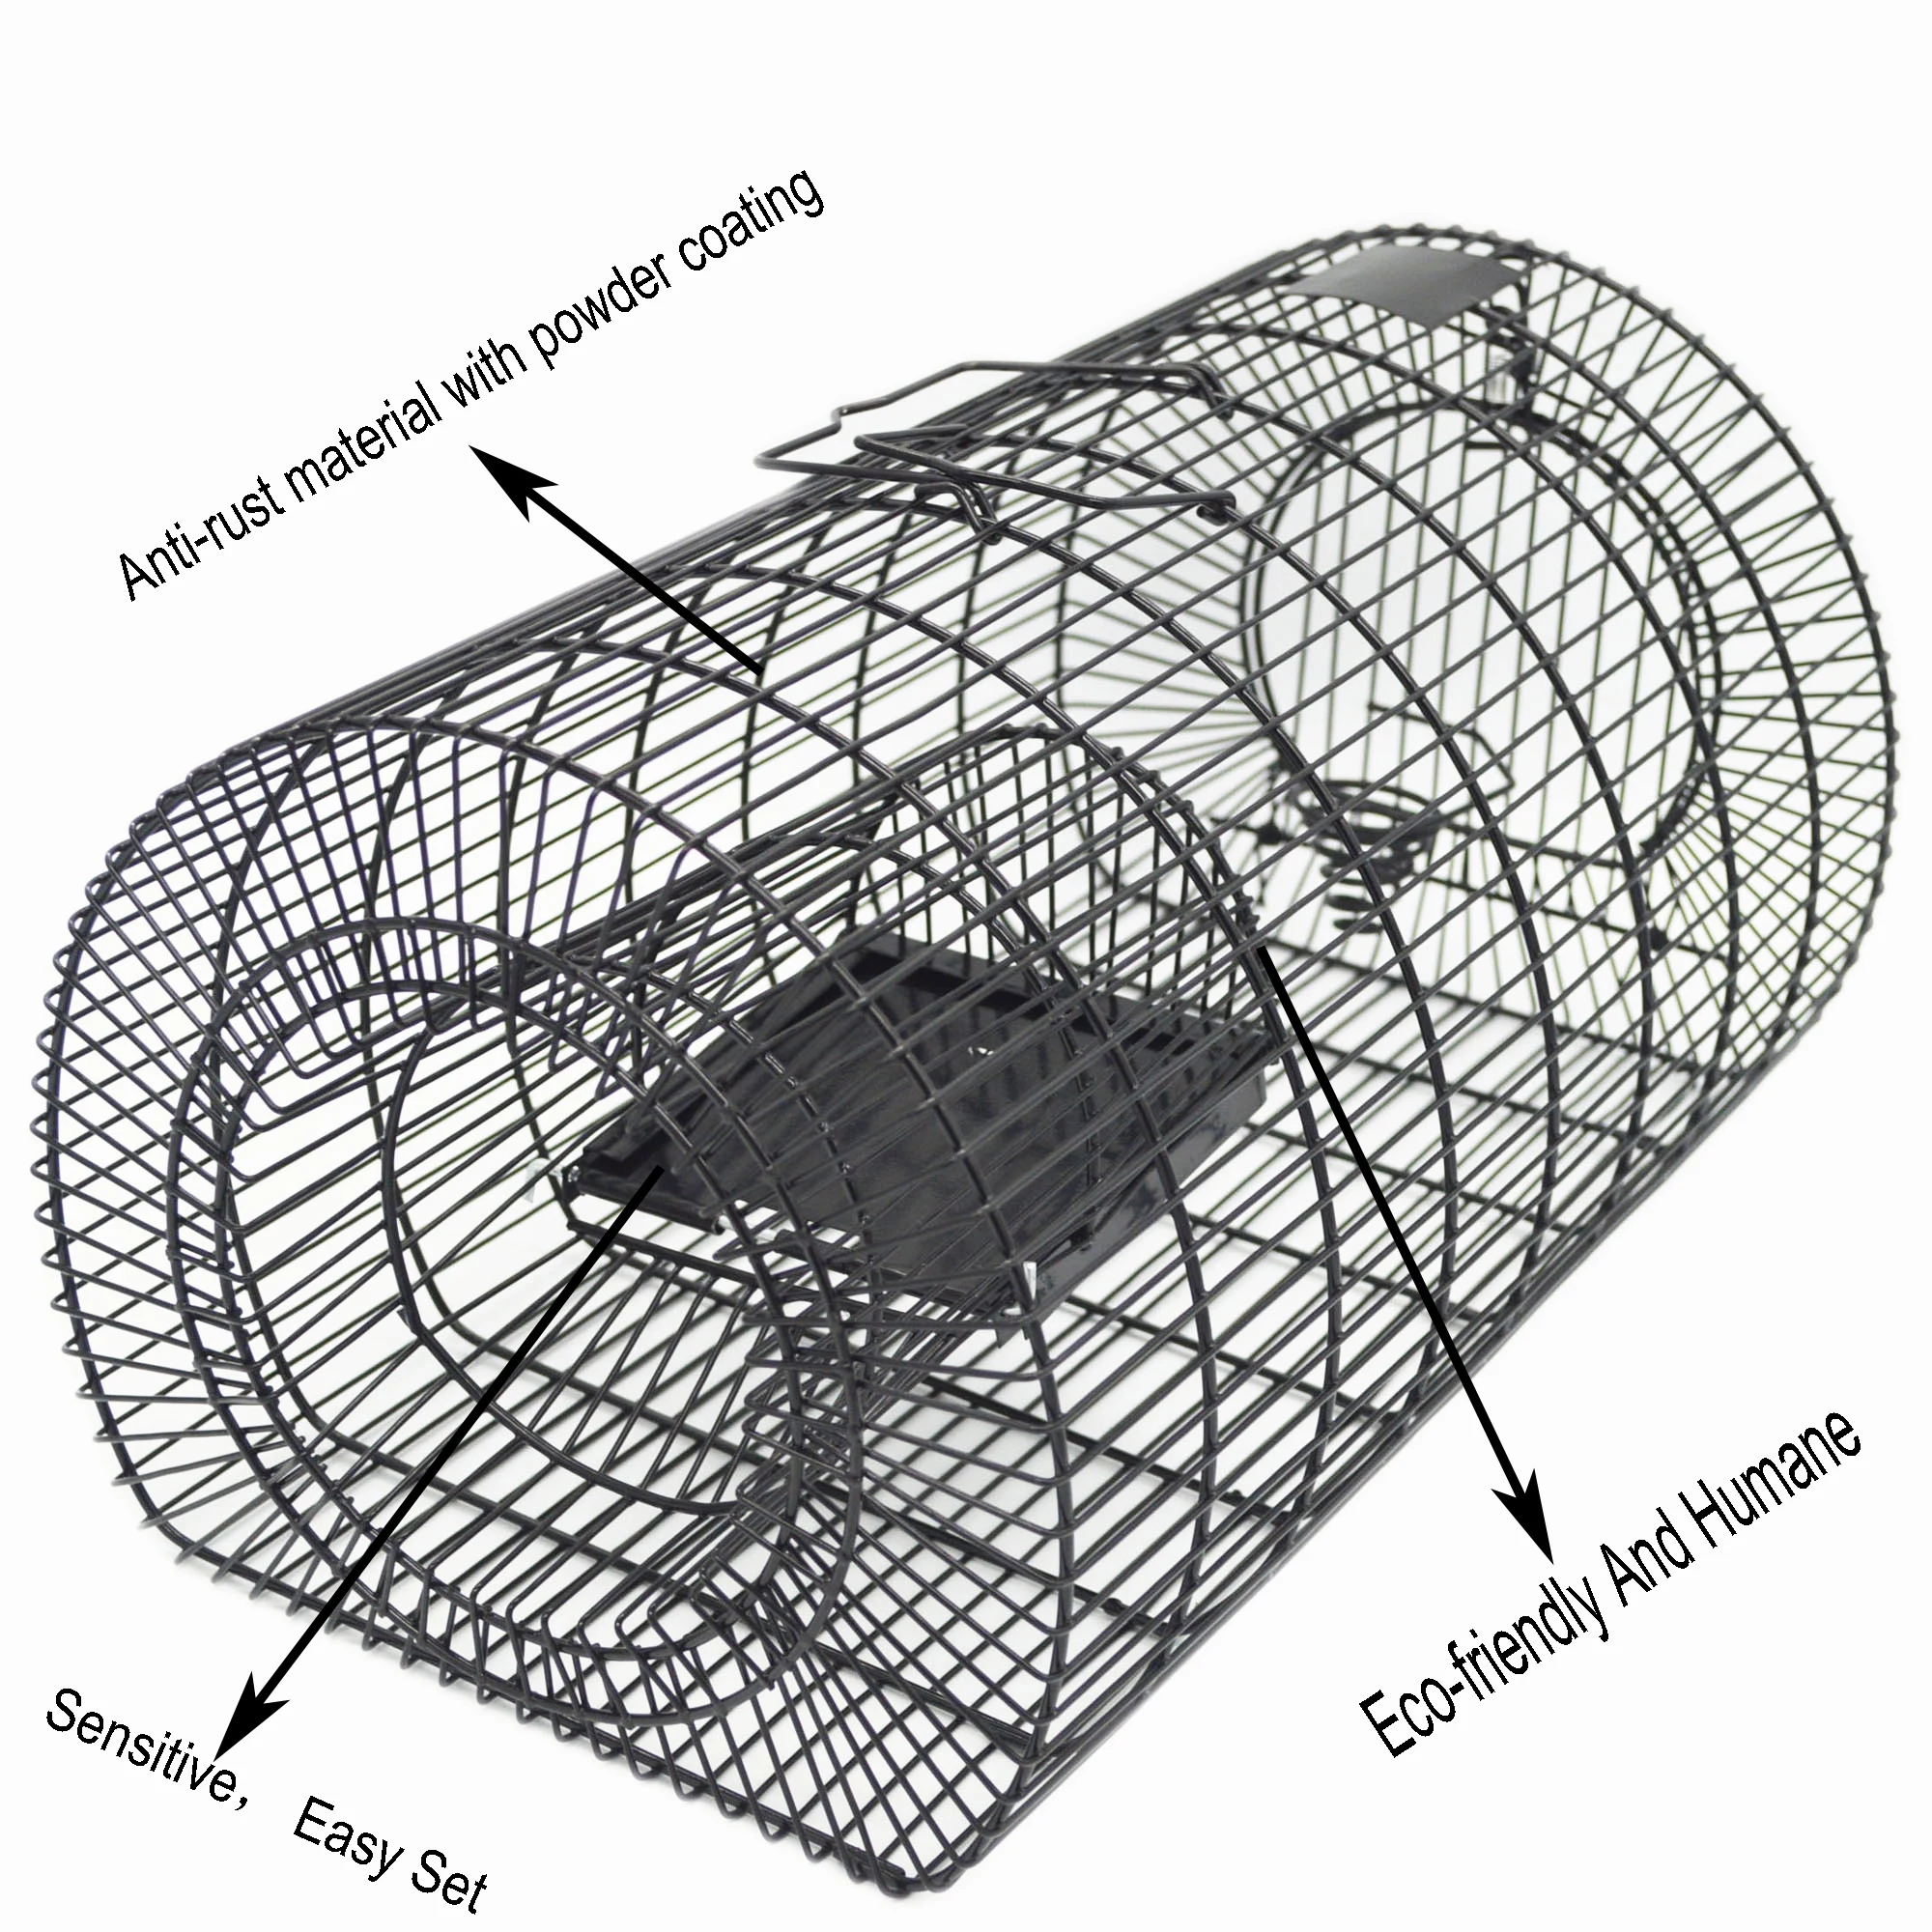 Details about   Animal Trap 32x12x12 Steel Cage Live Rodent Humane Control Skunk Rabbit Opossum 